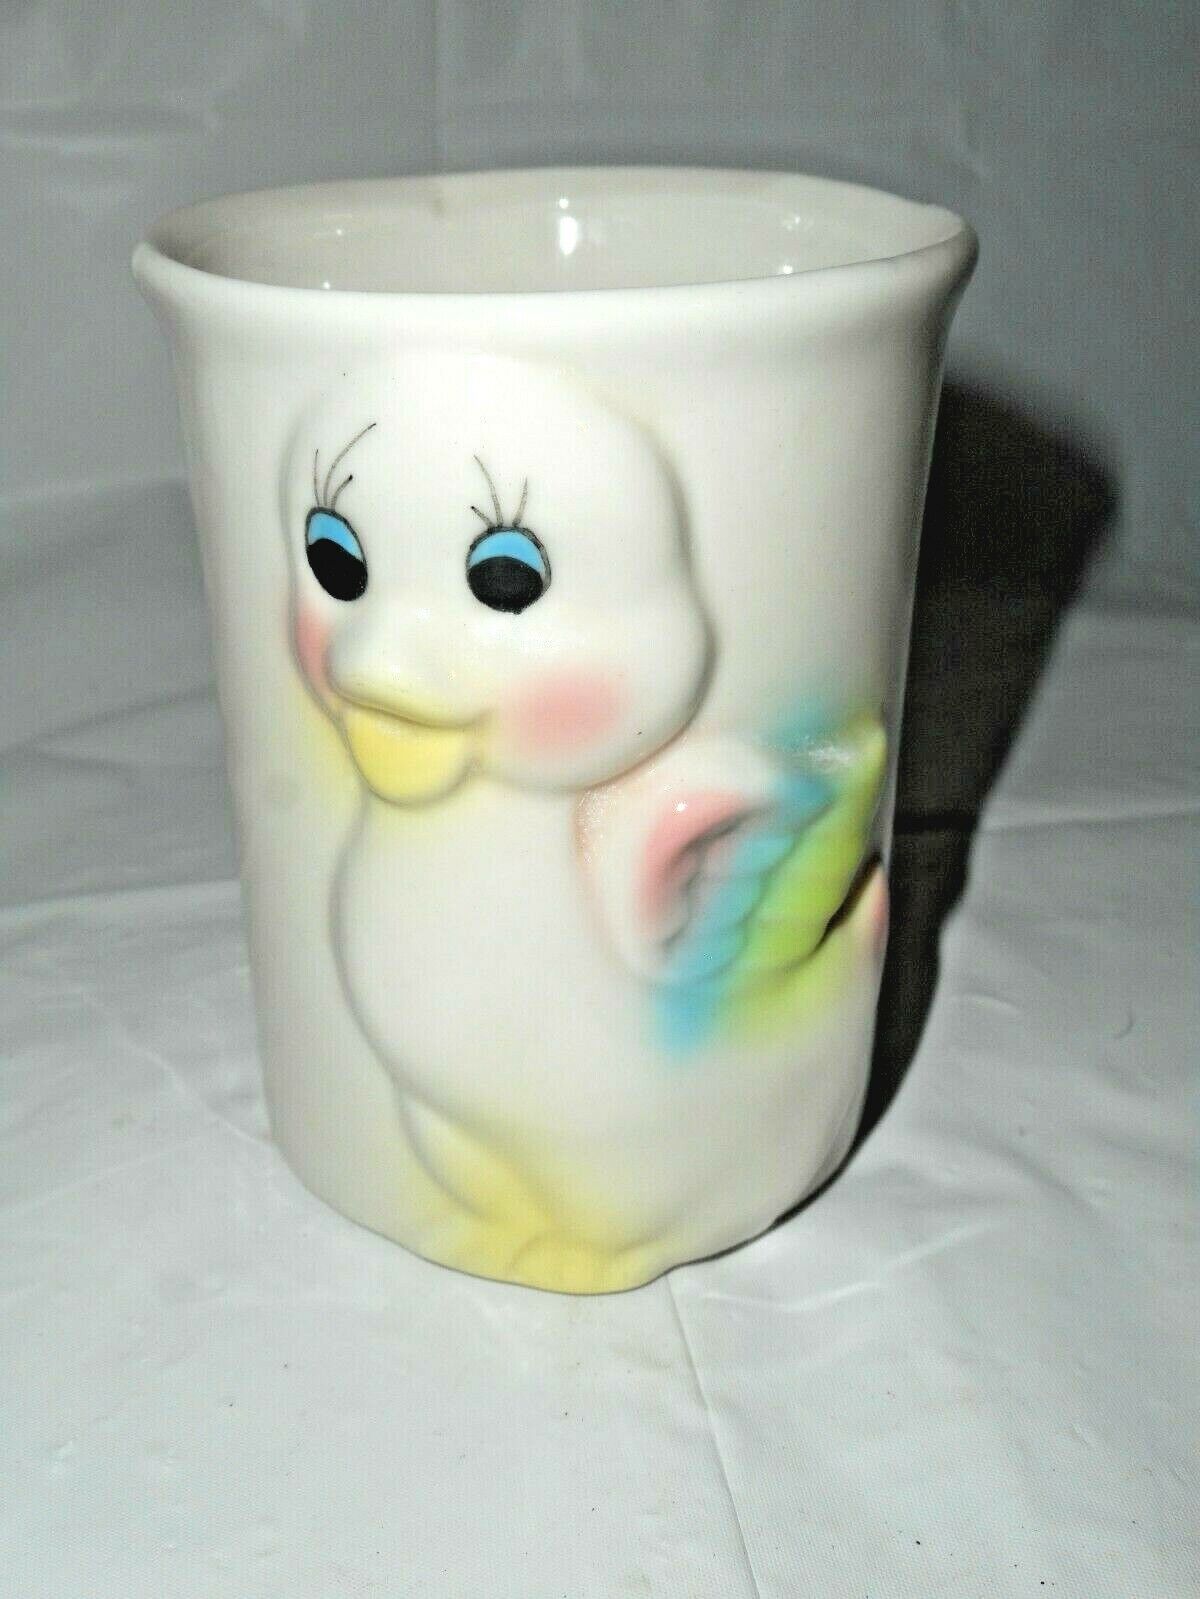 Ducky Drinking Cup Ducks Cup Water Glass Ceramic Childs Cup  - $9.90